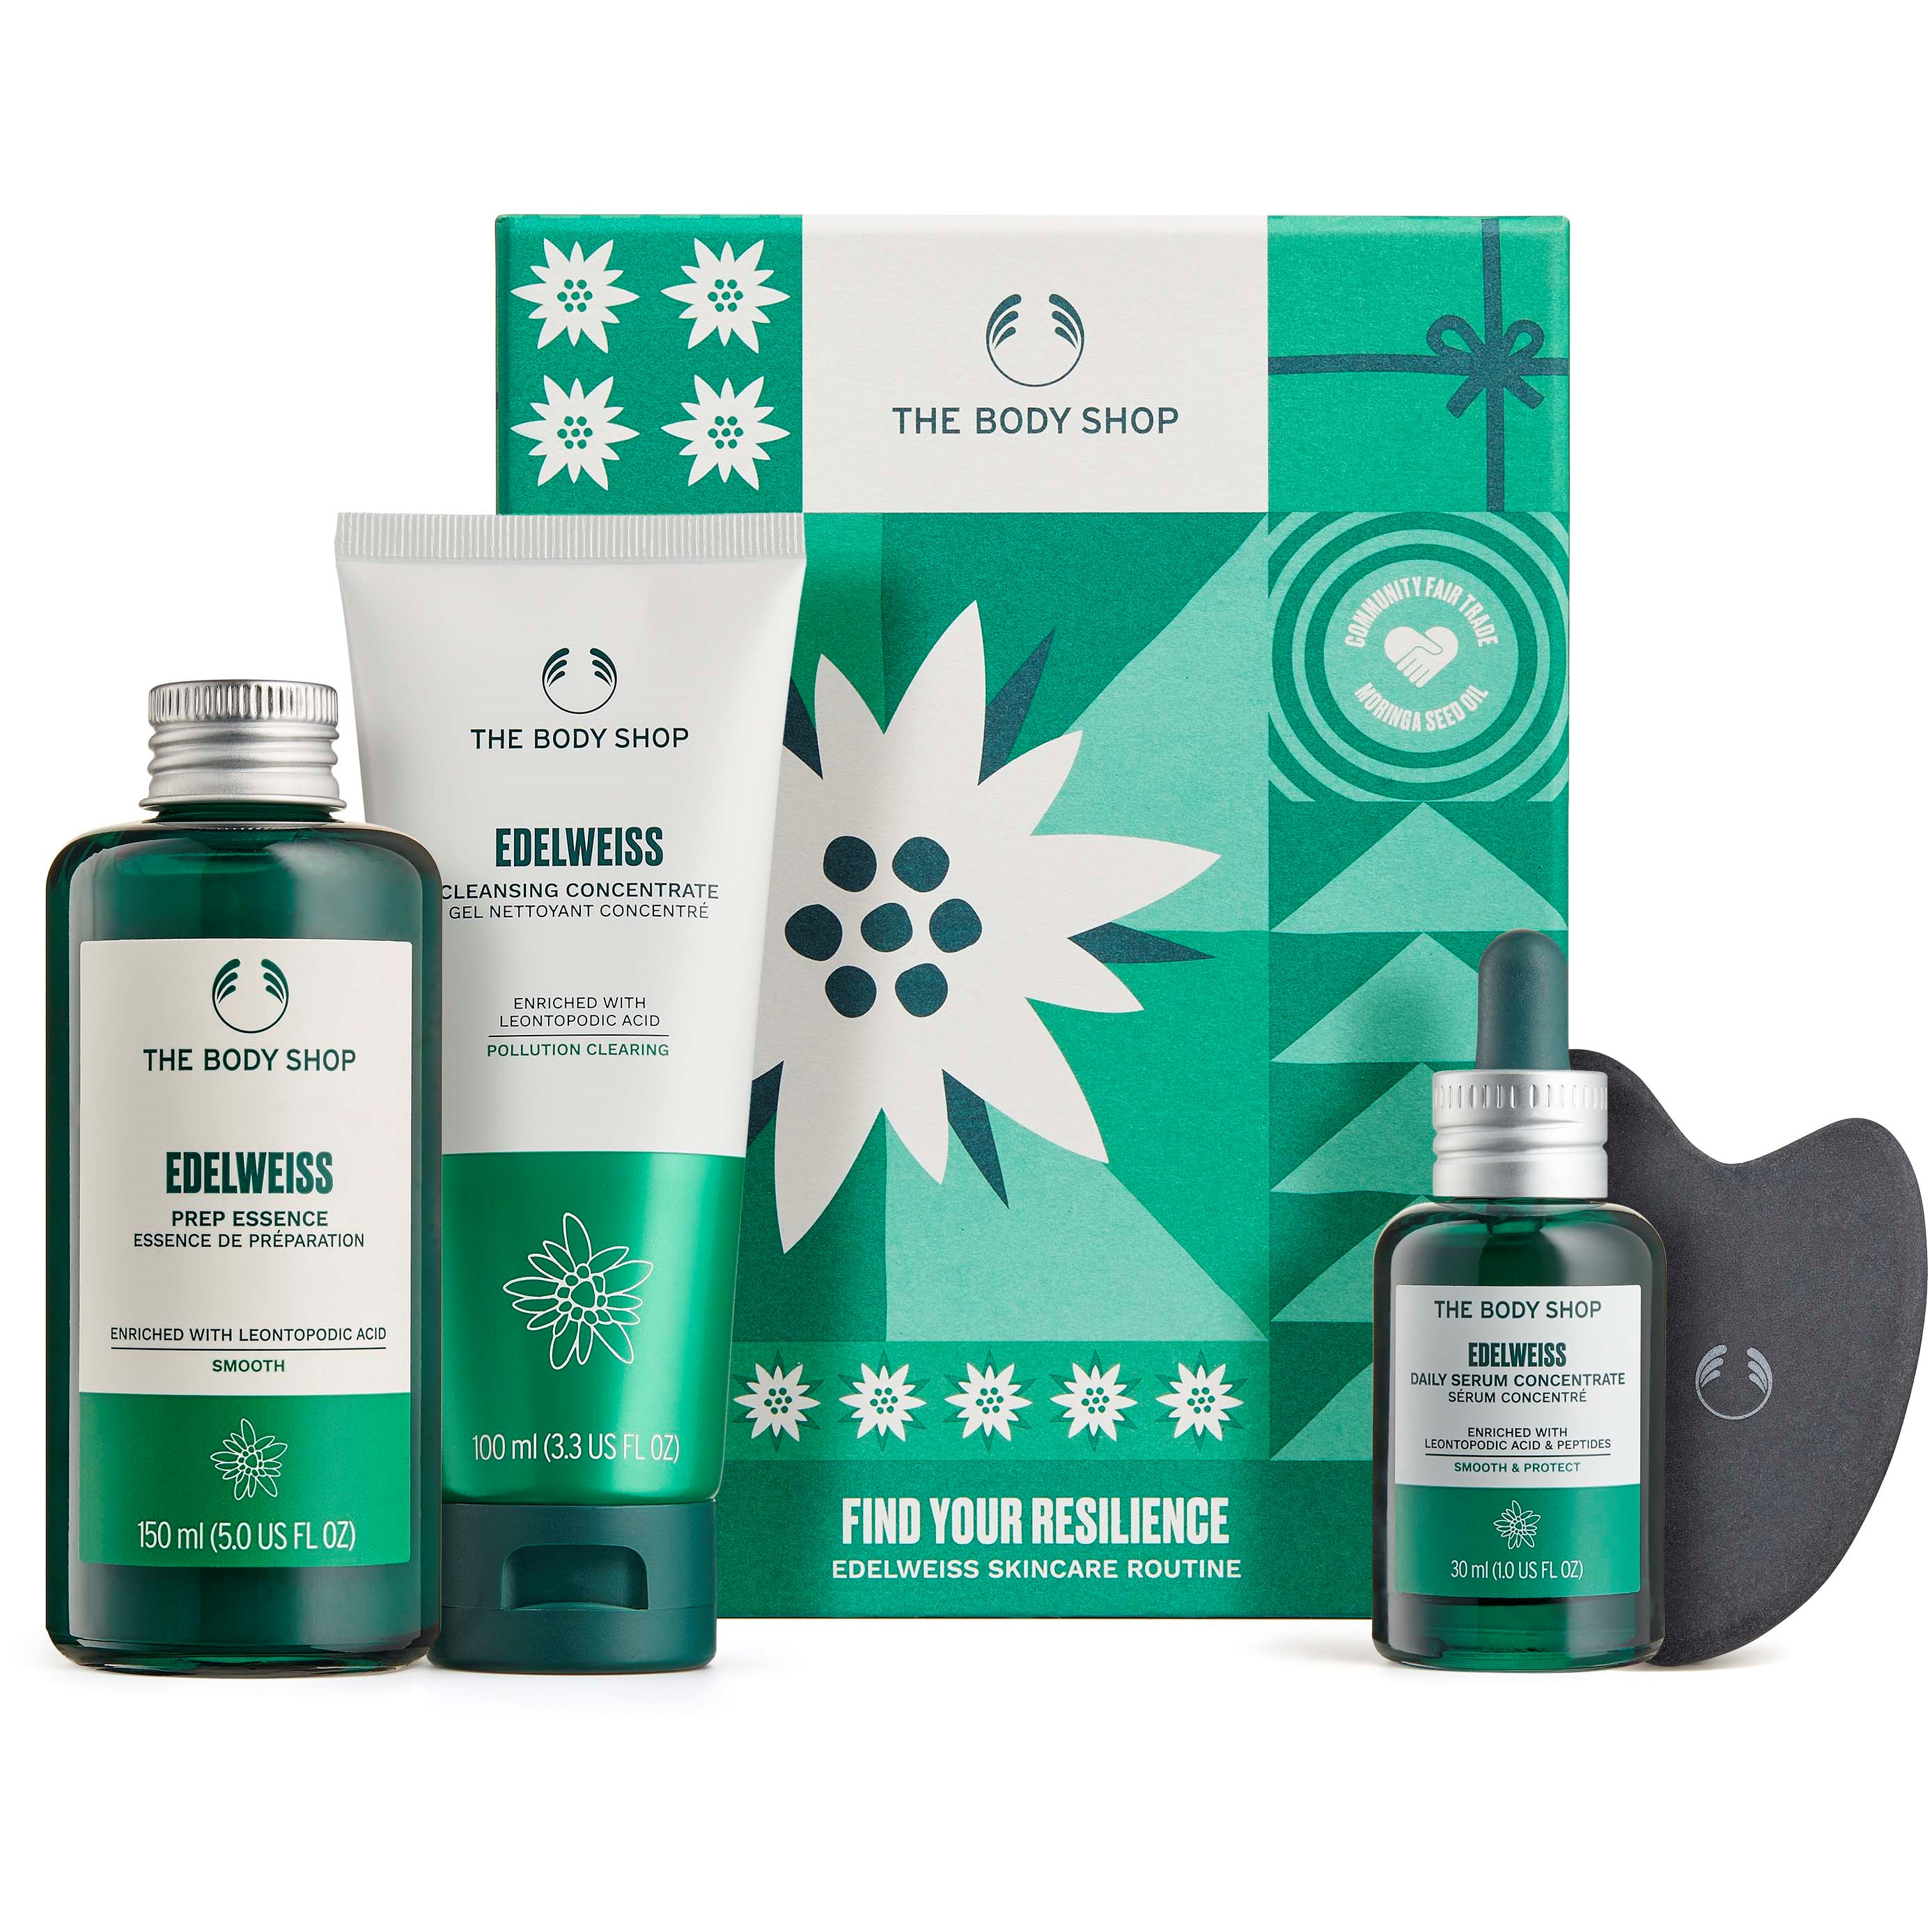 Läs mer om The Body Shop Edelweiss Find Your Resilience Edelweiss Skincare Routin